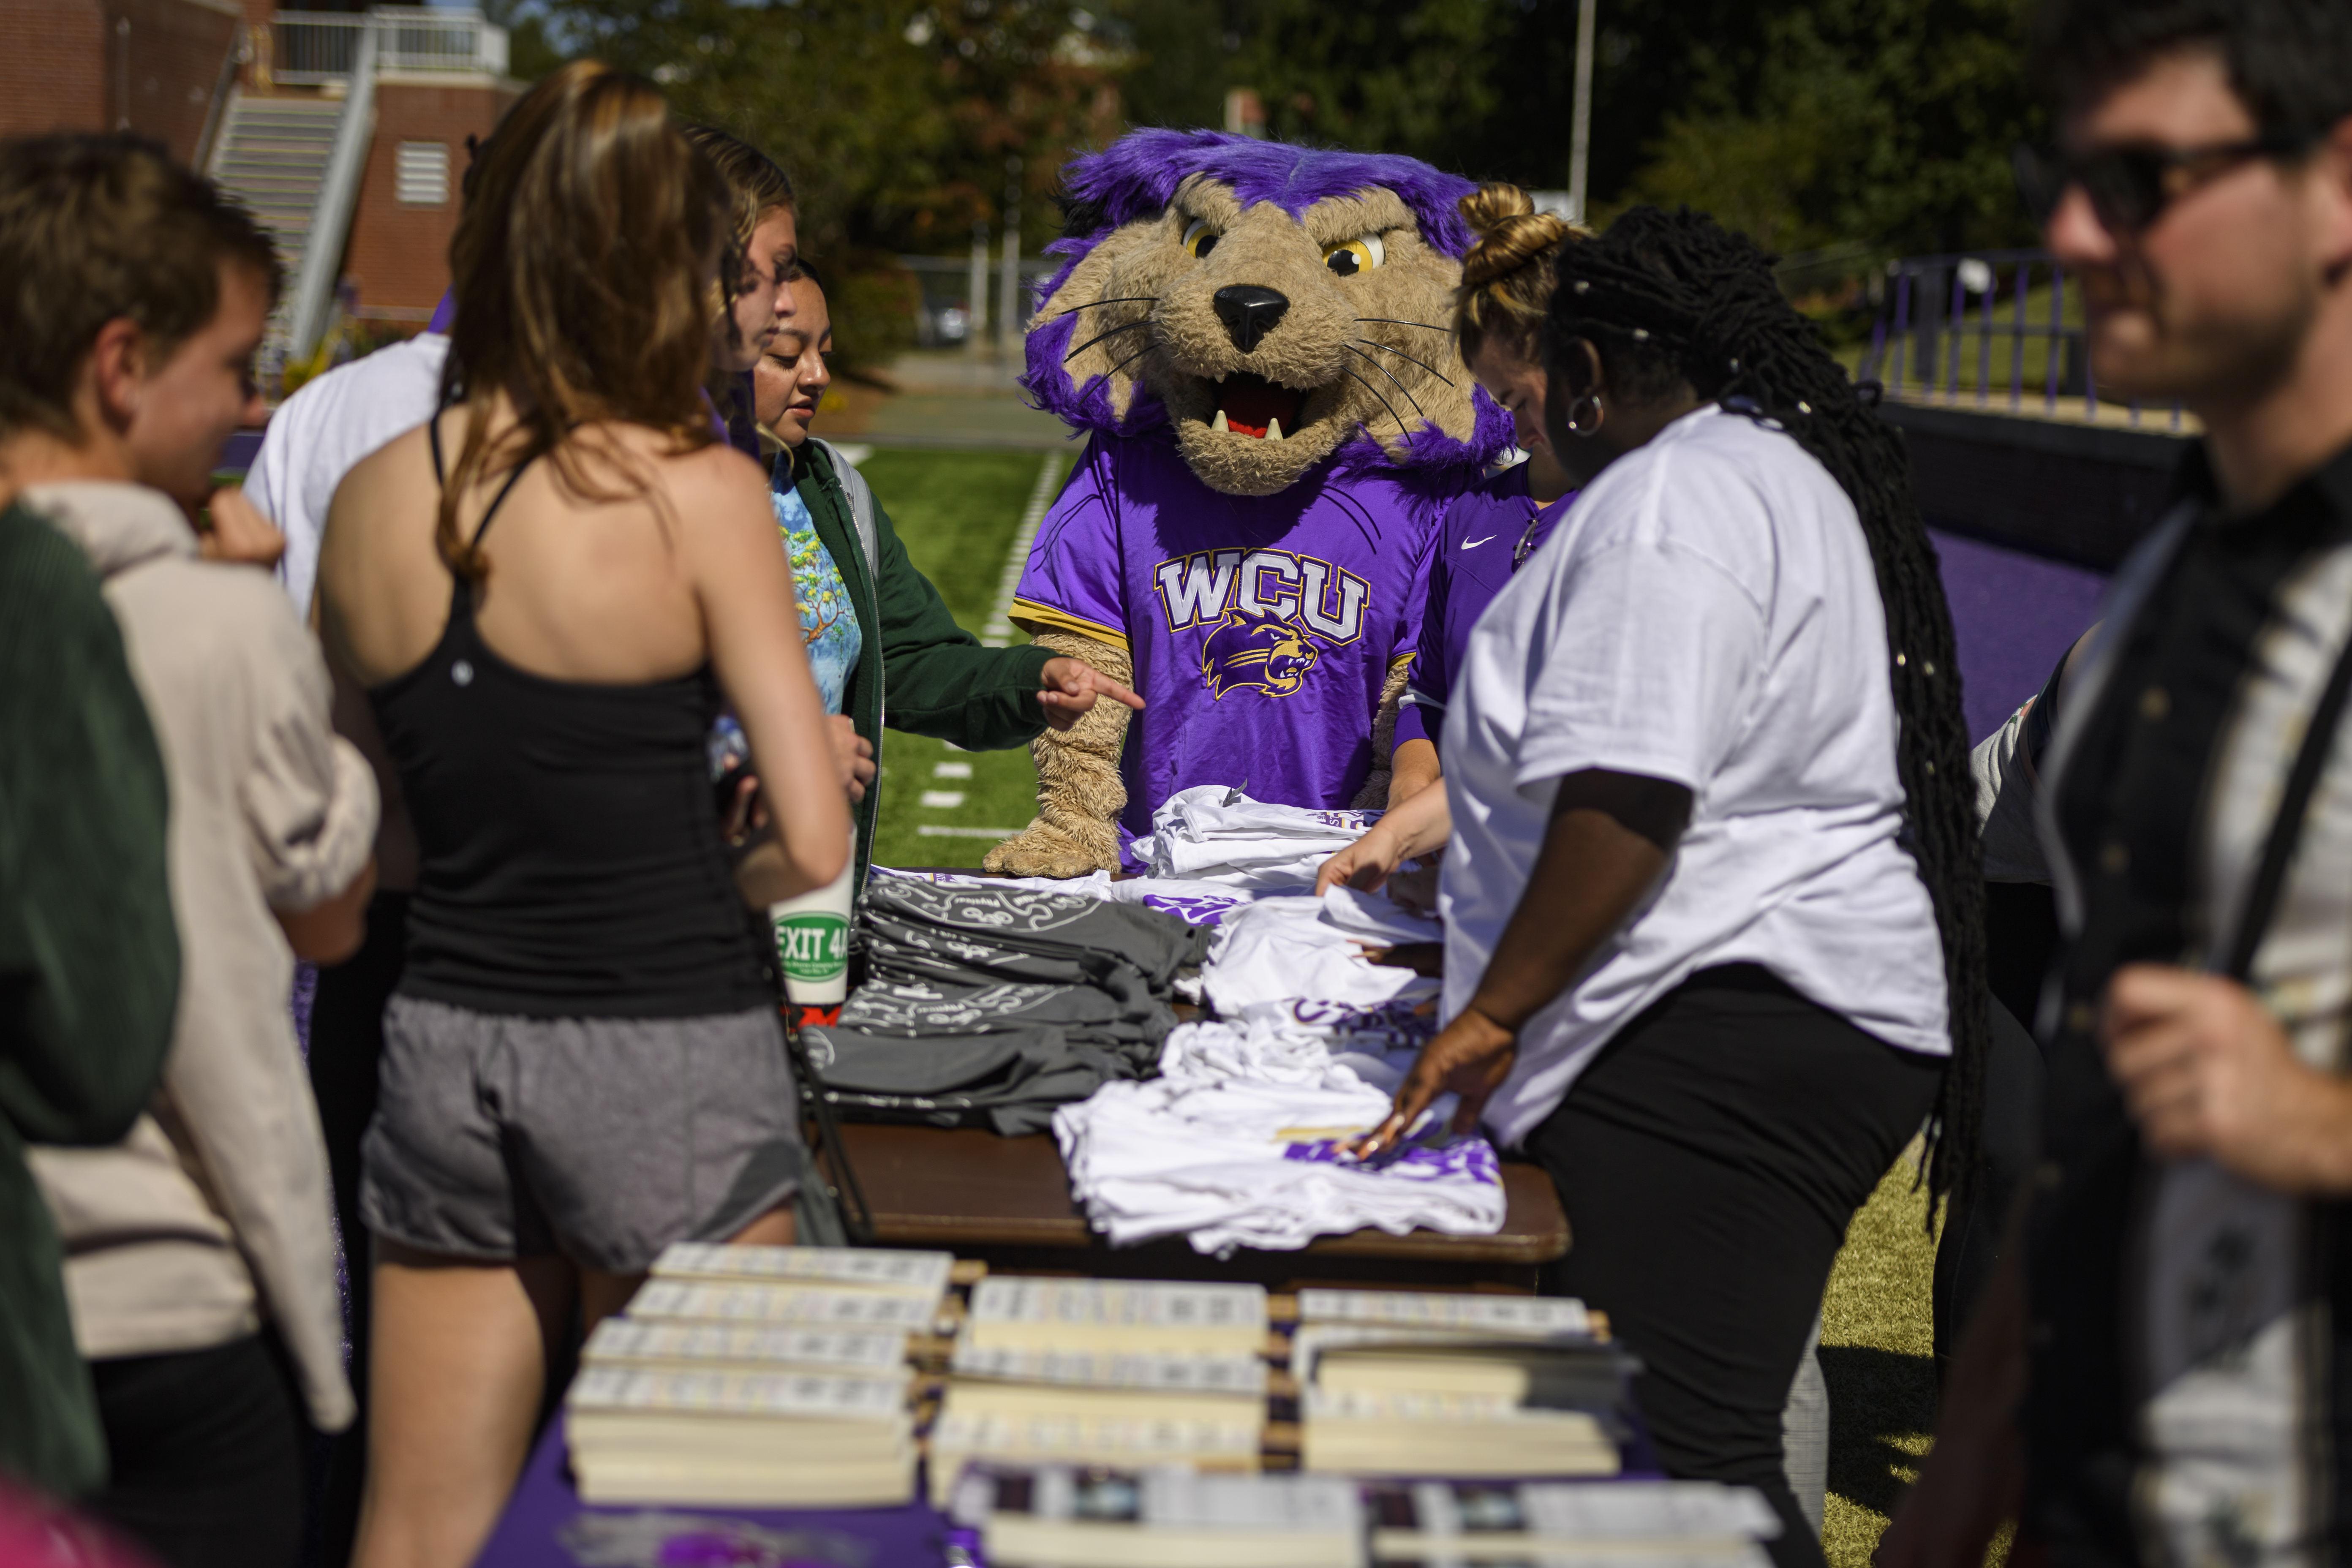 Paws at tabling event